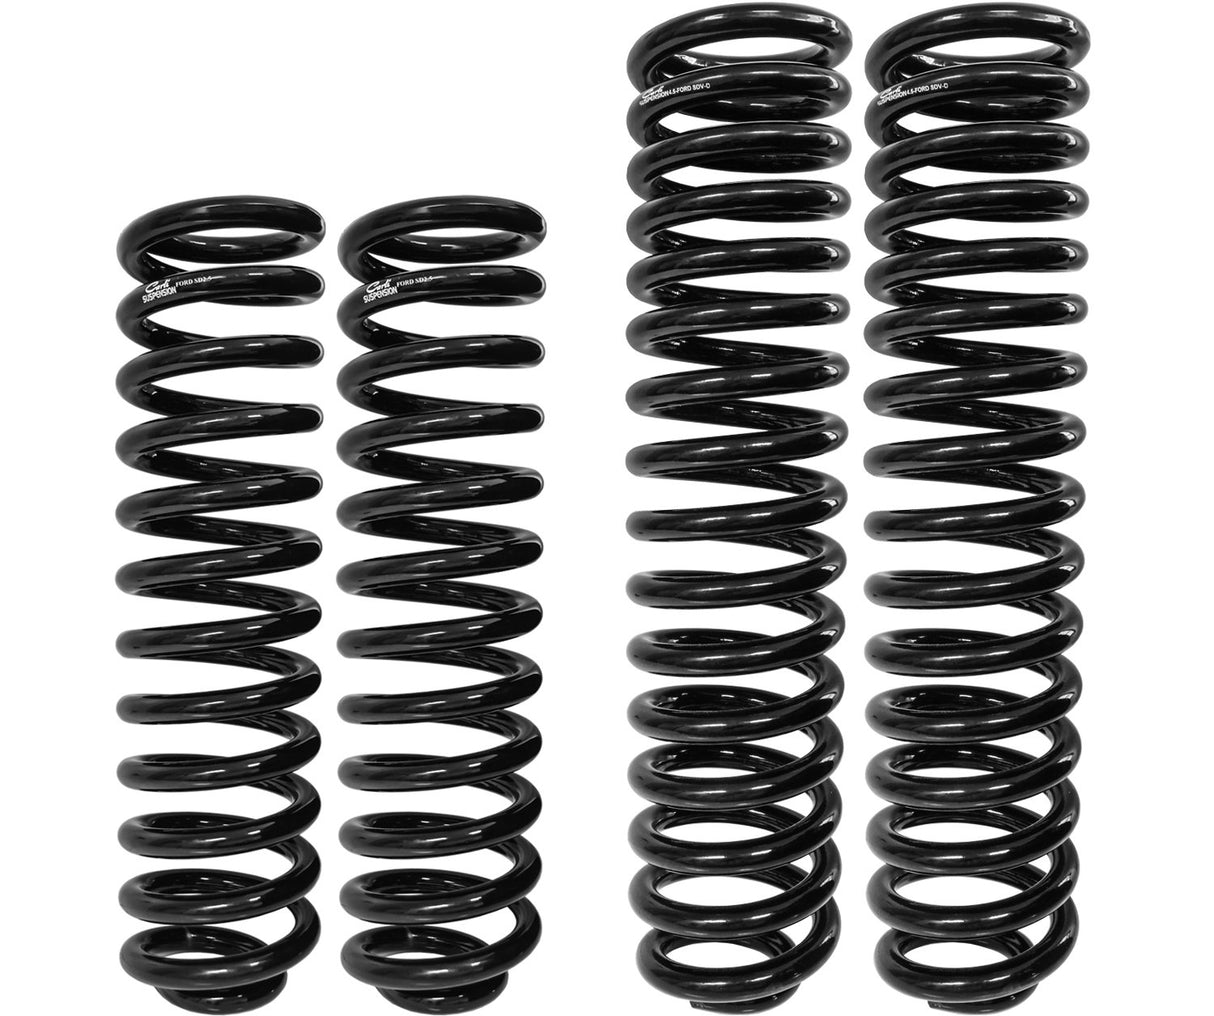 11-23 FORD F250/F350 COIL SPRINGS, 2.5", GAS